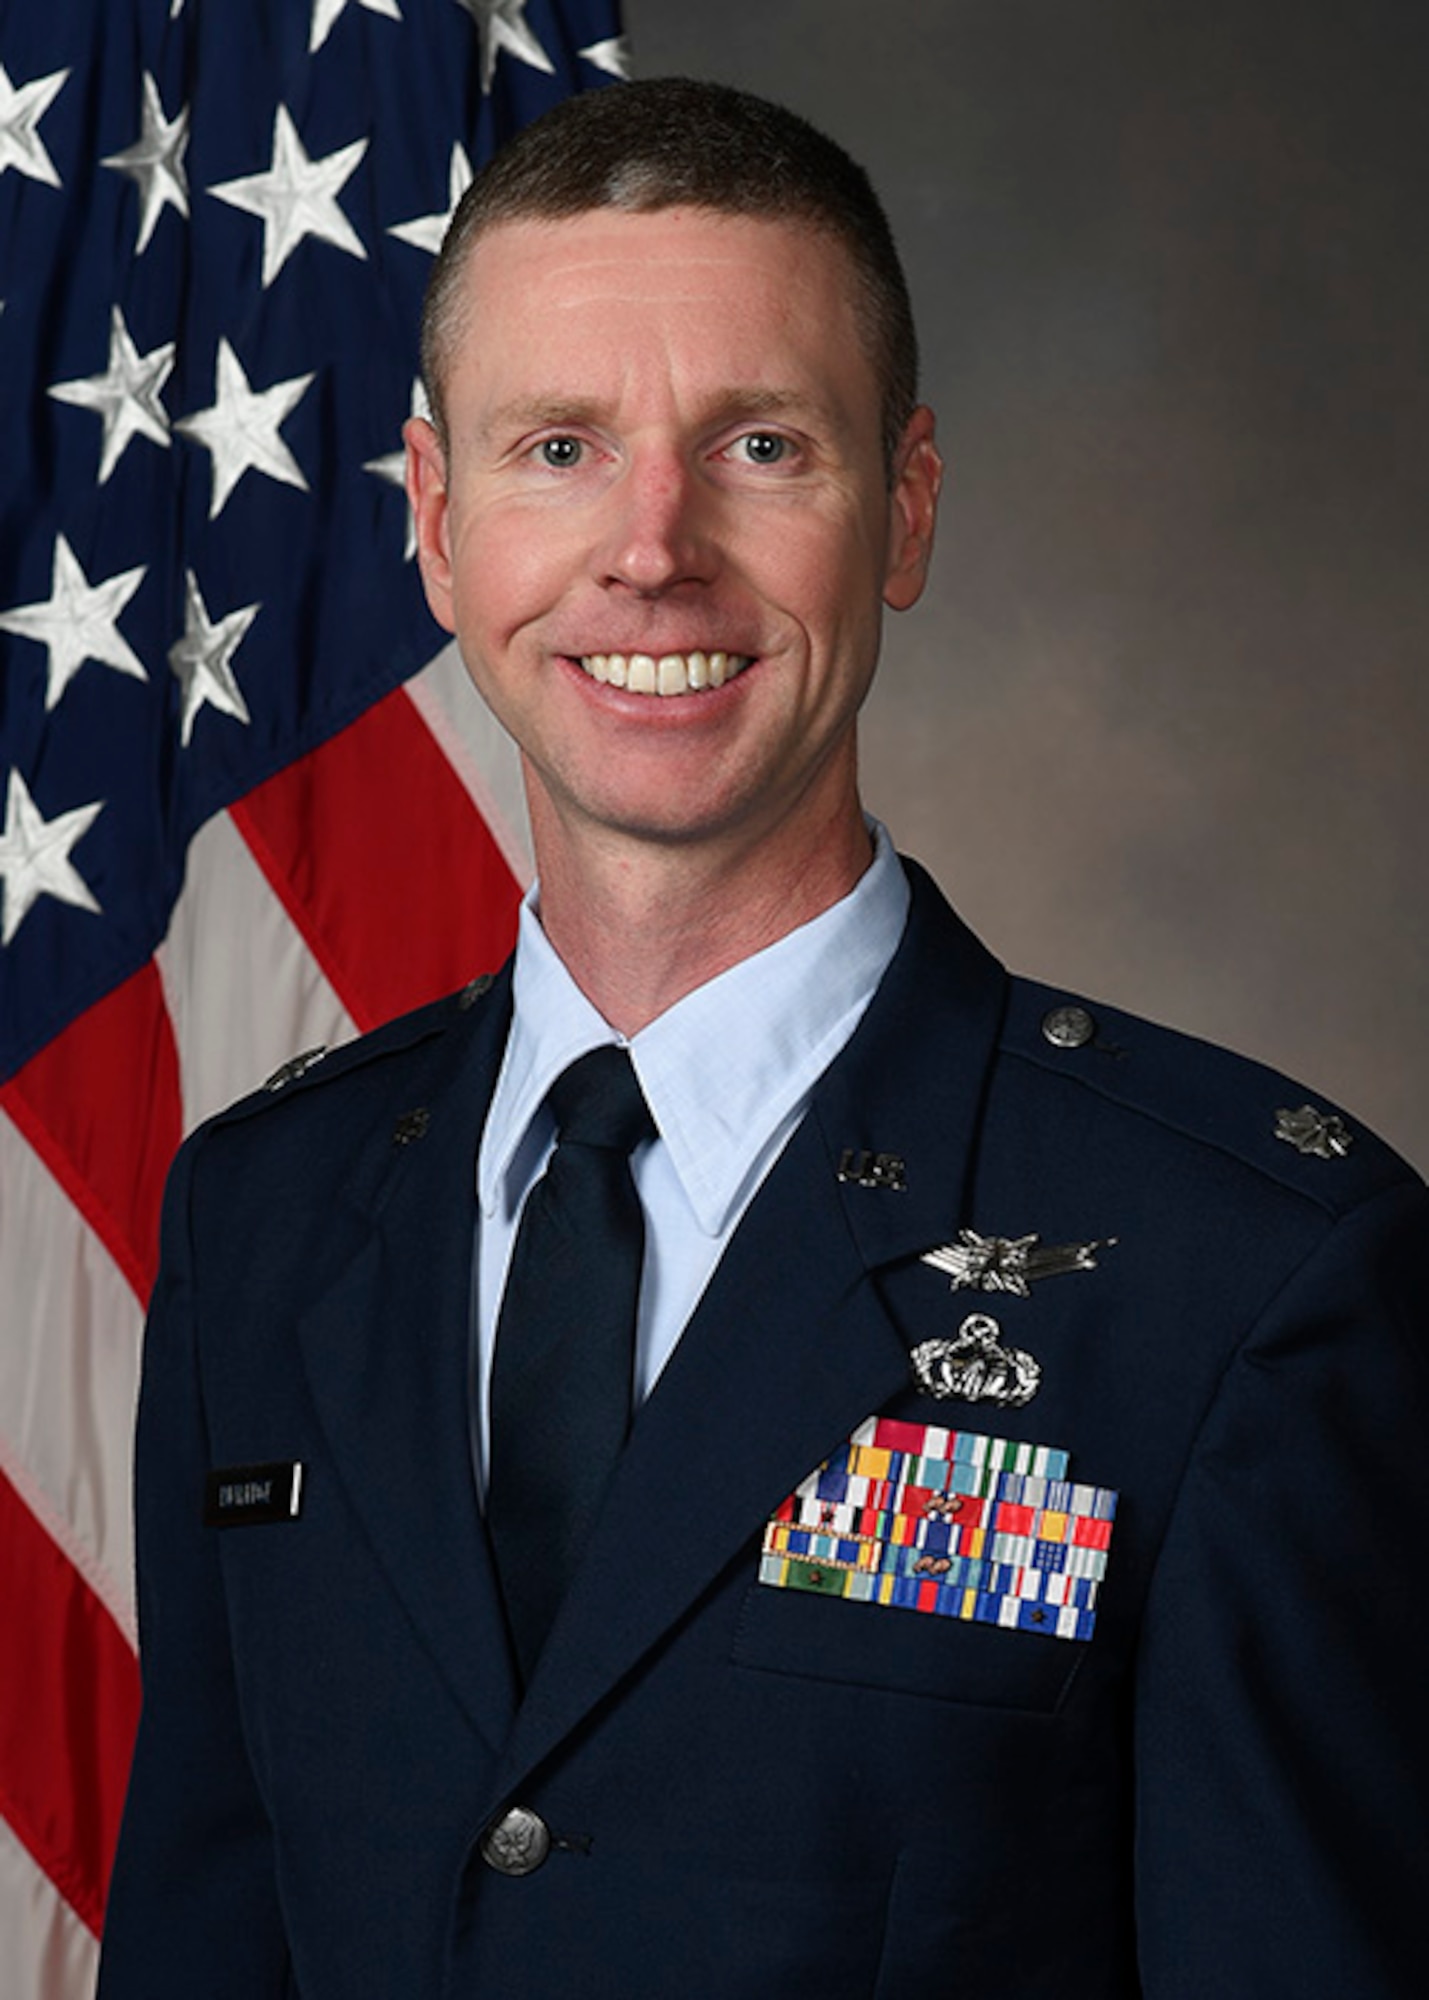 Lt. Col. Jay Rutledge, an associate professor and senior military faculty member at the Air Force Institute of Technology (AFIT), is performing a year-long sabbatical in the Air Force Research Laboratory Aerospace Systems Directorate. He earned the 2020 Science, Engineering and Technical Management (SE&TM) award at the Air Force Materiel Command level June 22, 2020. (Courtesy photo)